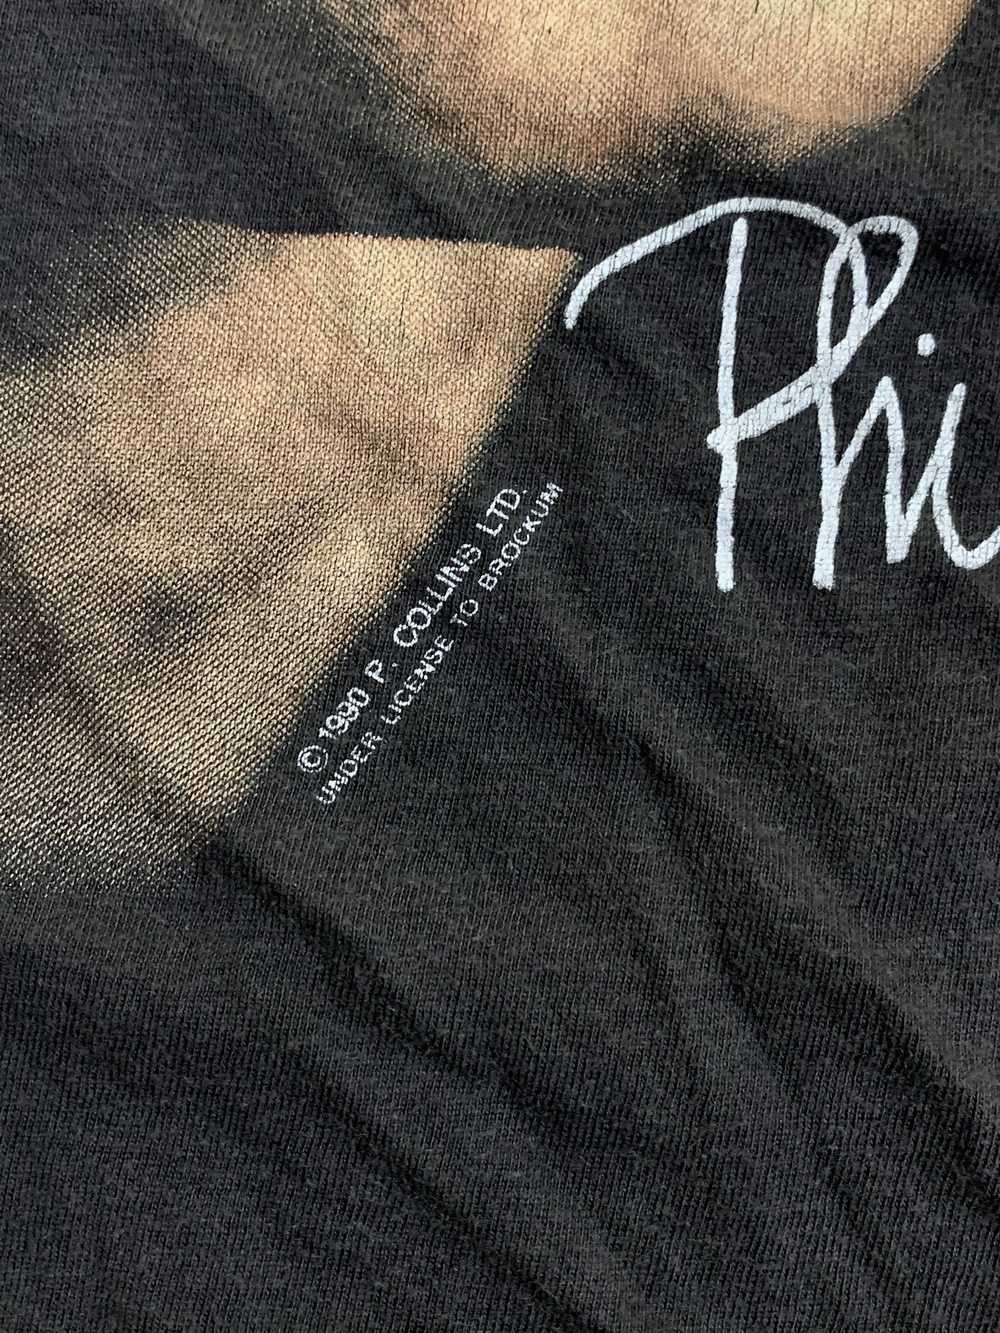 Band Tees × Very Rare × Vintage vintage phill col… - image 3